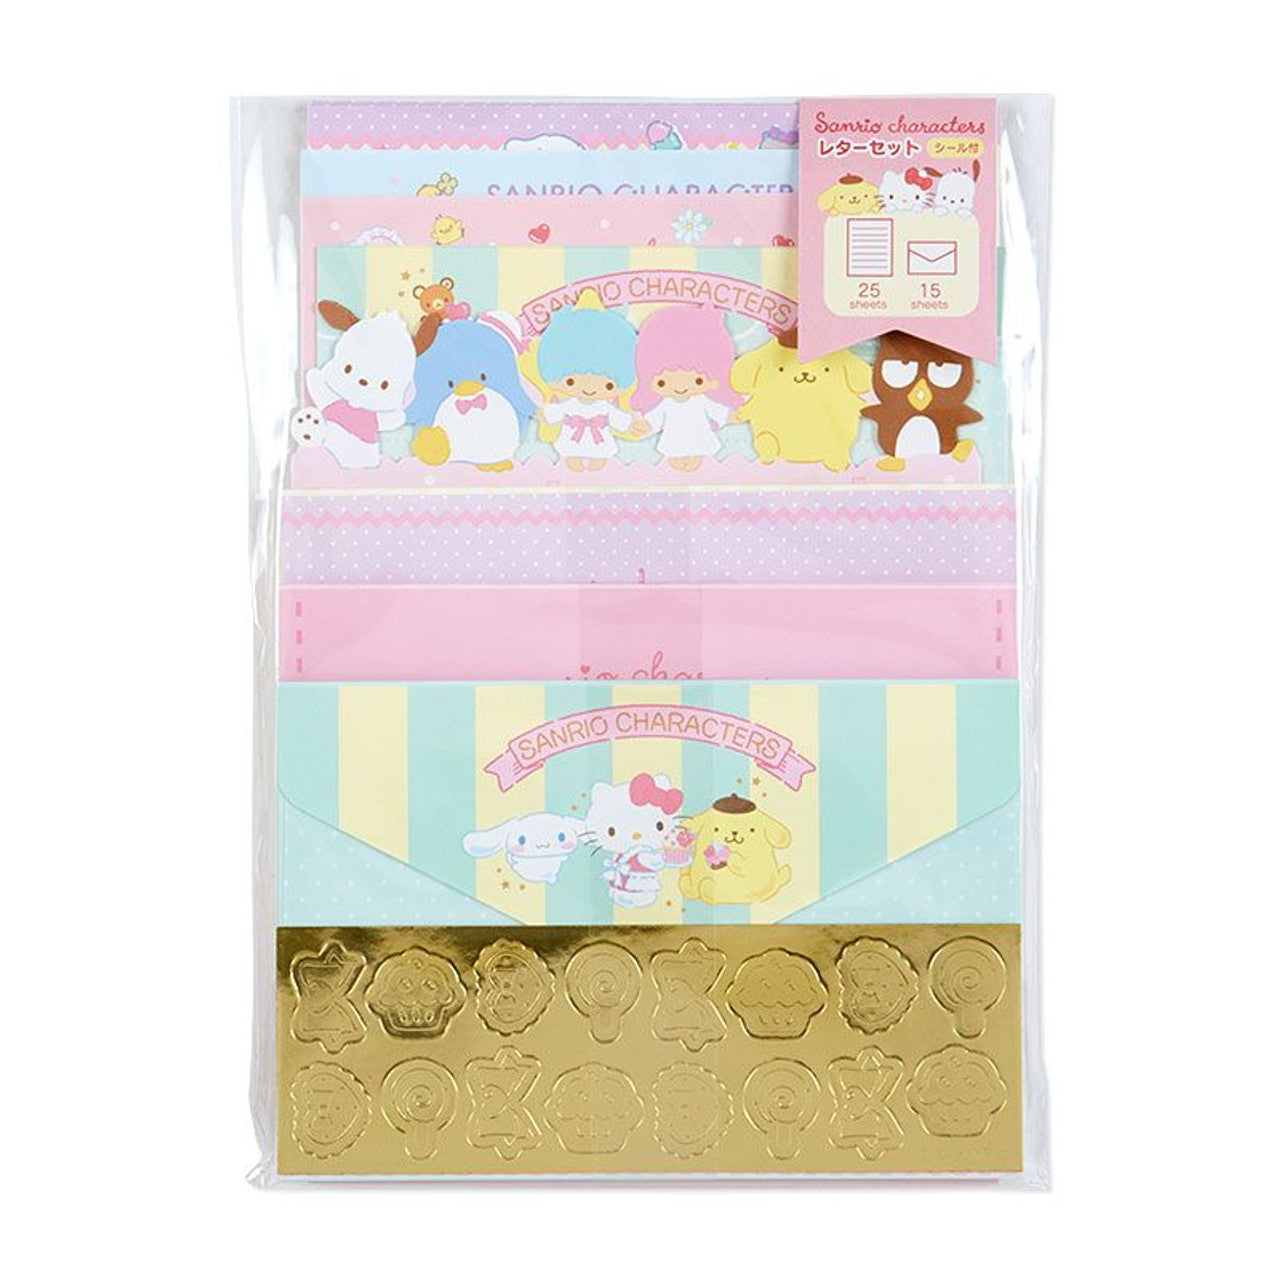 Sanrio Characters Letter Set Mix